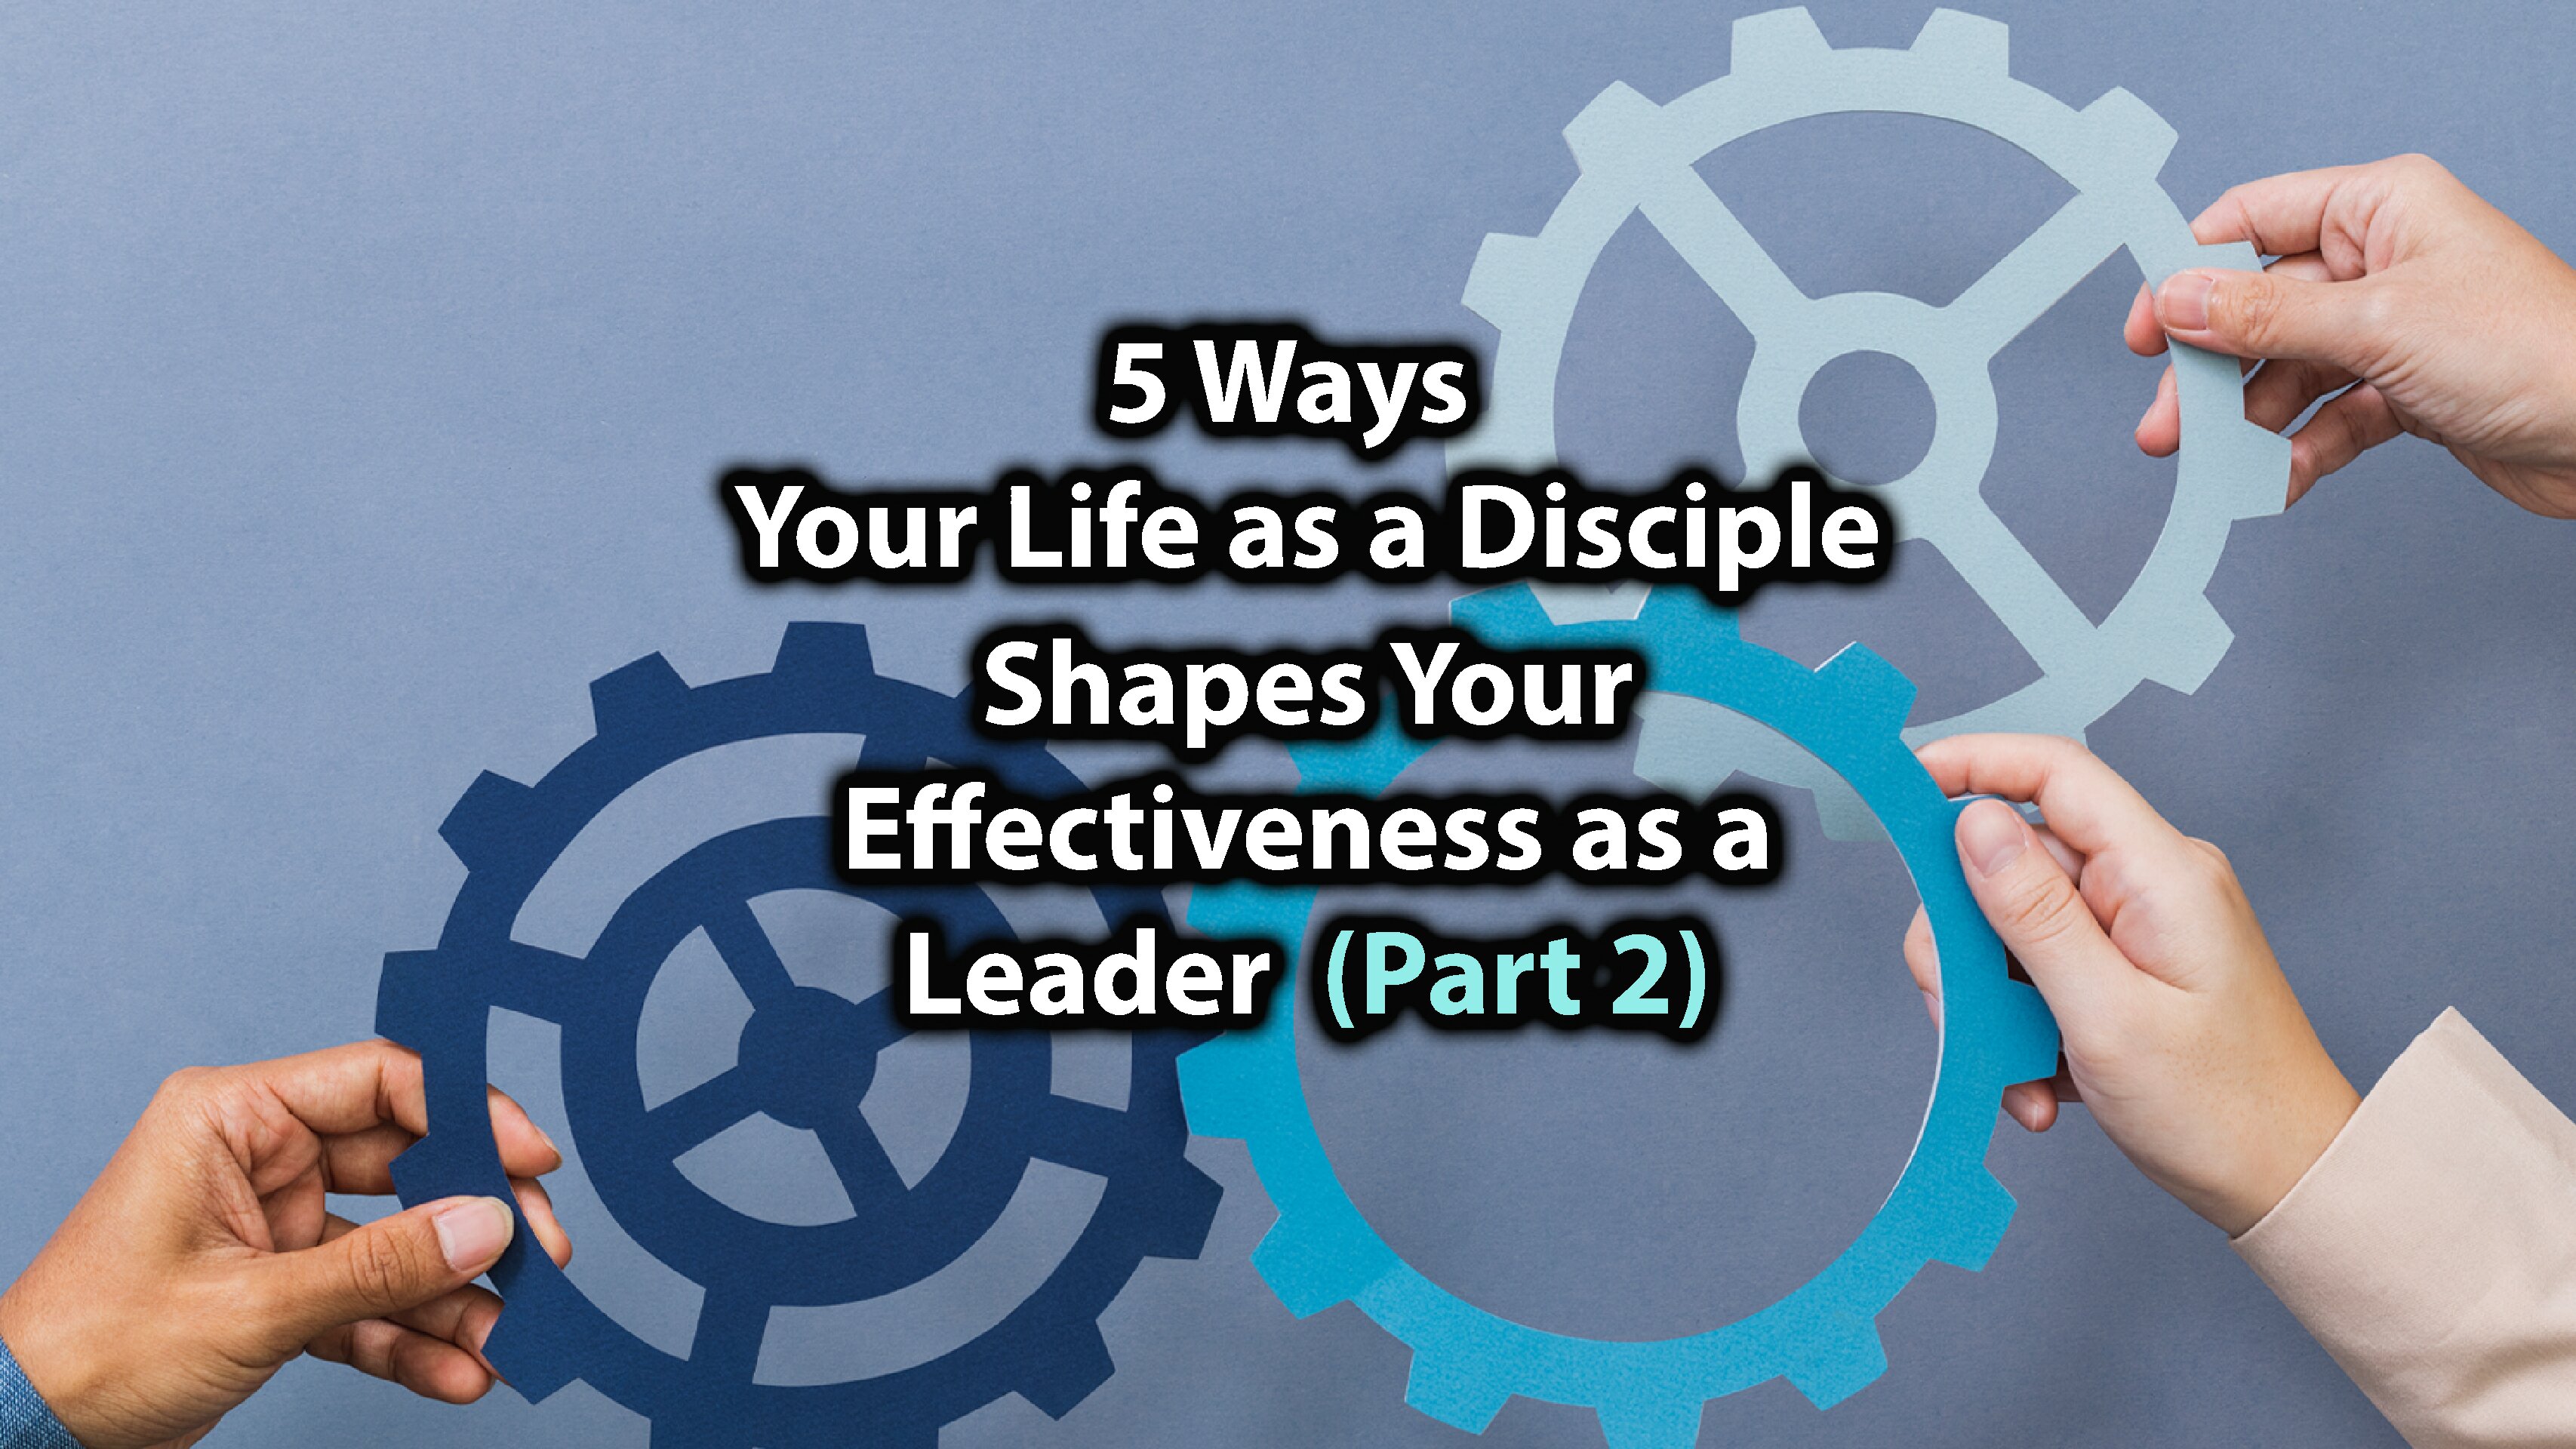 5 Ways Your Life as a Disciple Shapes Your Effectiveness as A Leader (Part 2)